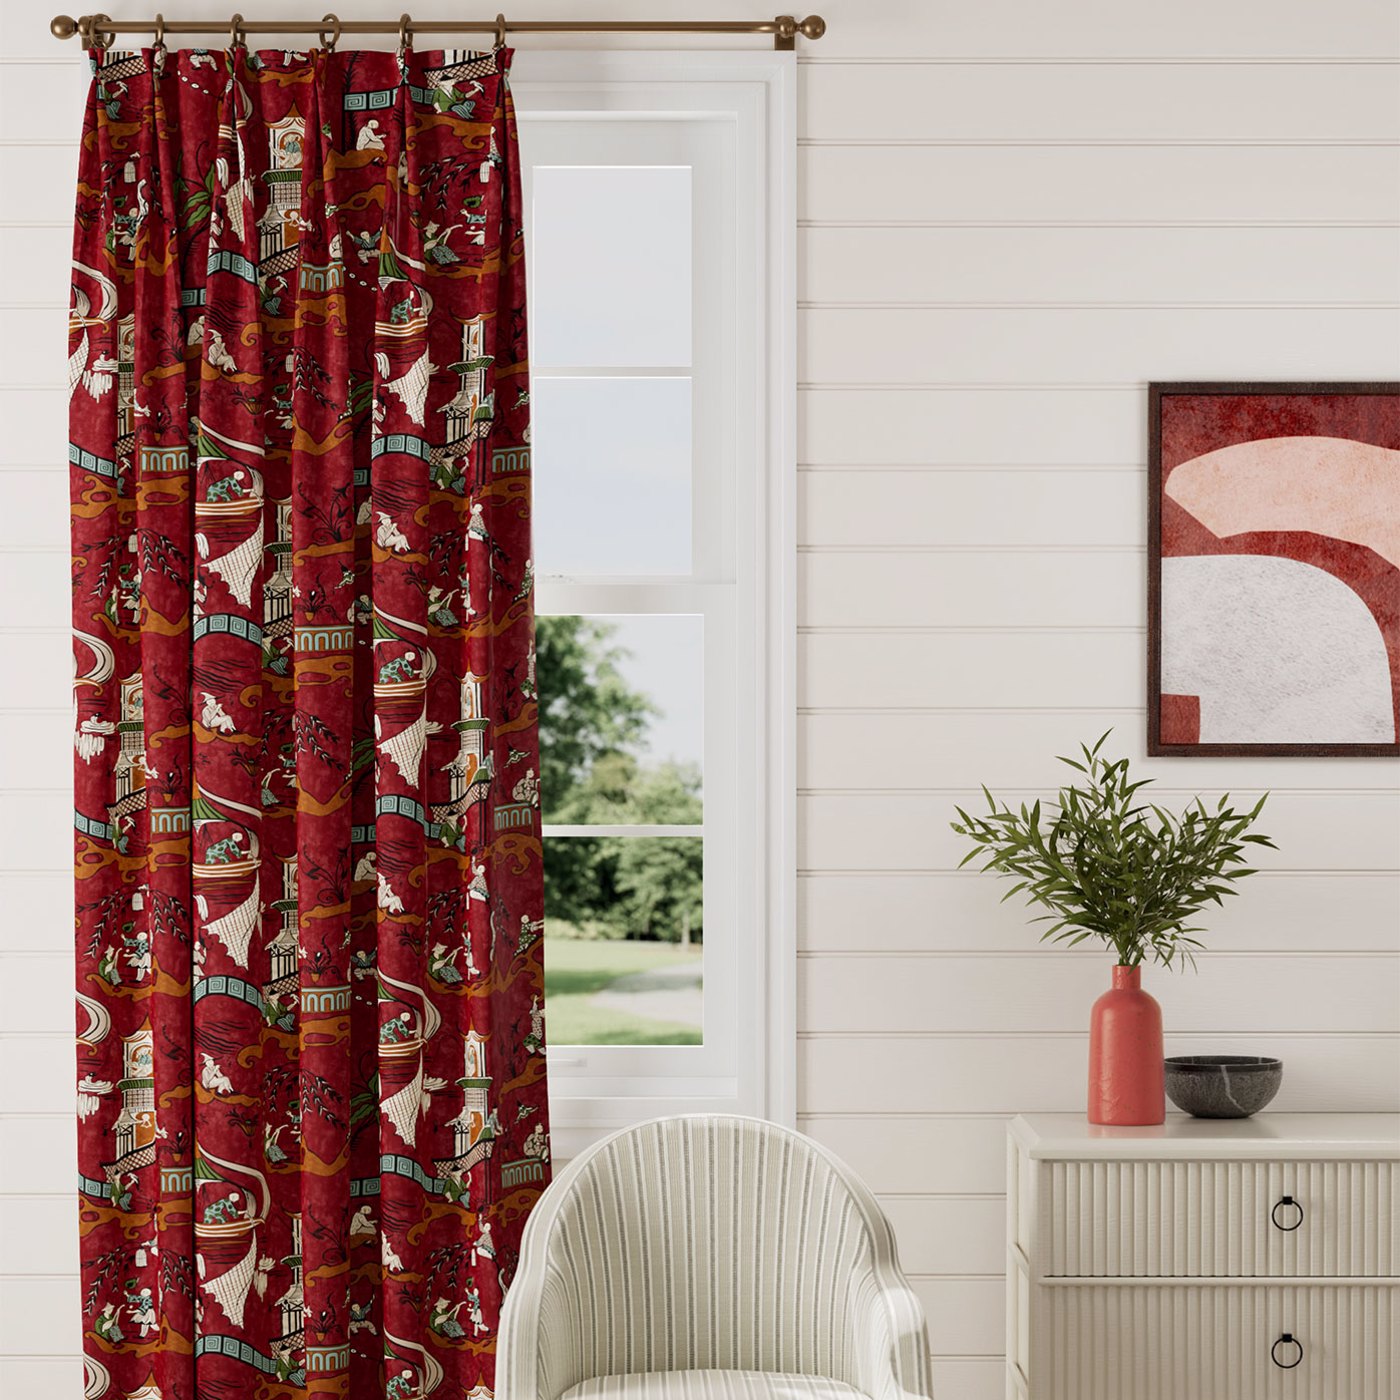 Pagoda River Room Fabric - Red